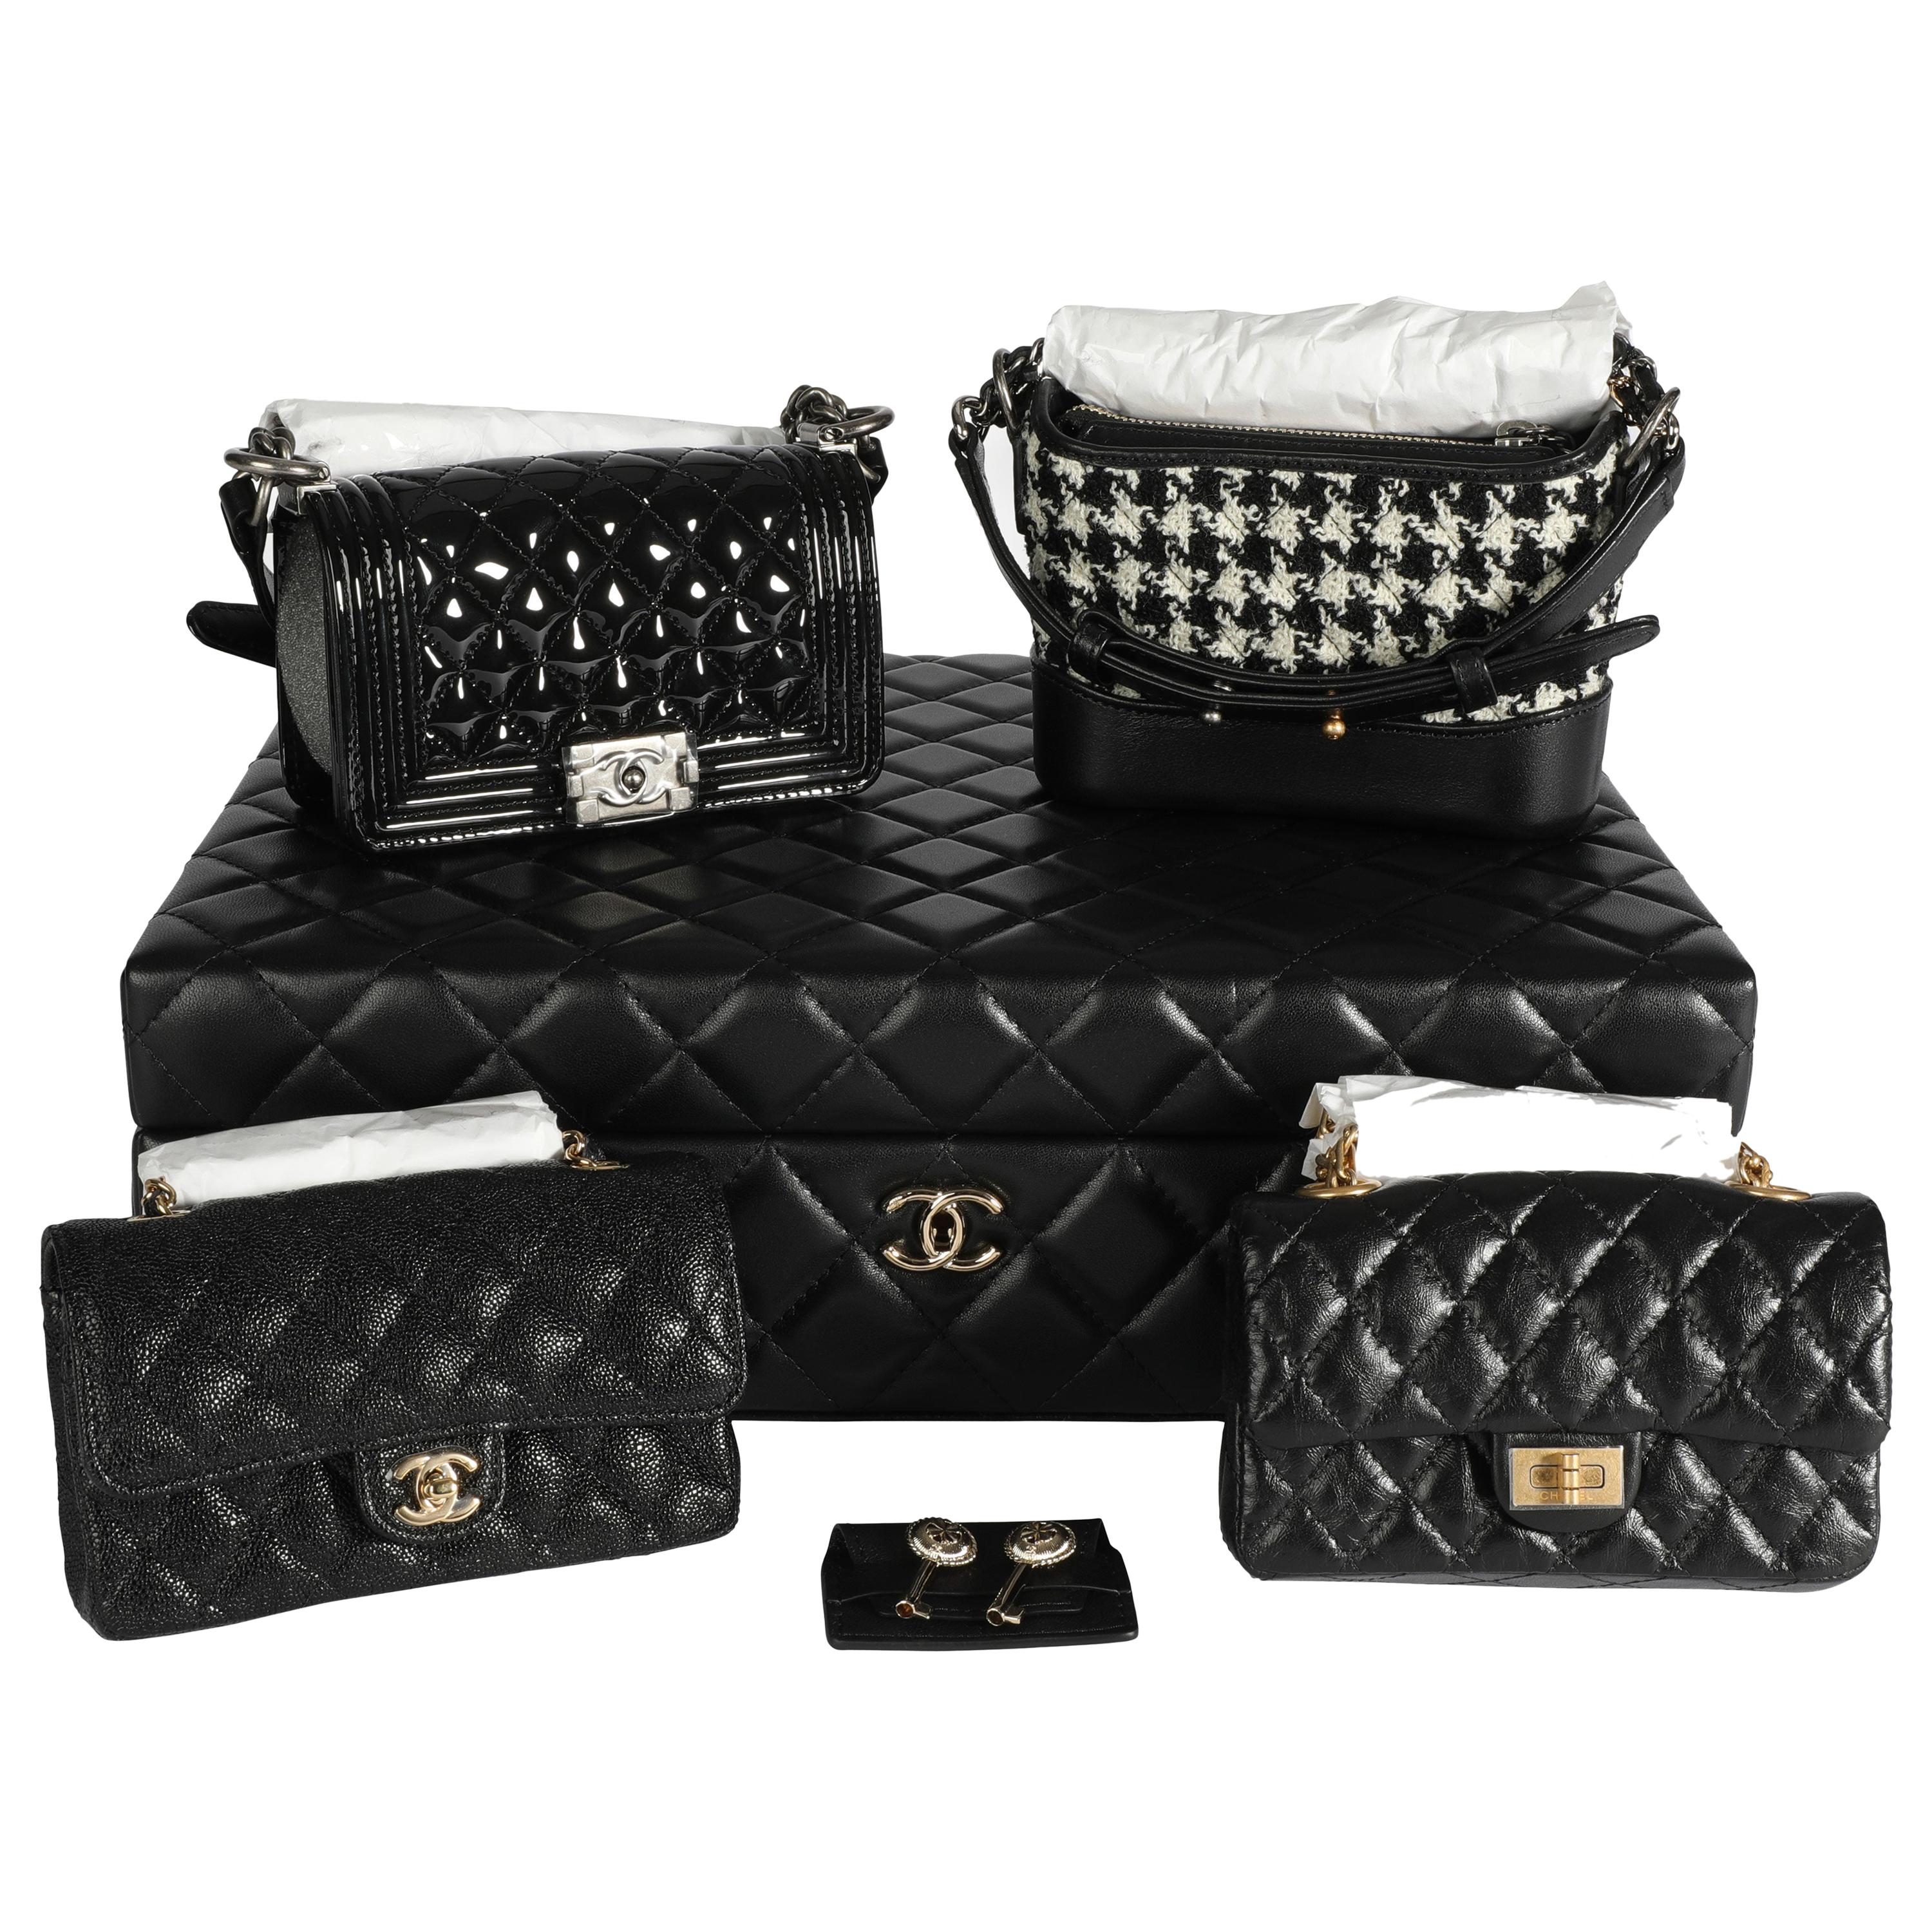 Chanel Success Story Set Of 4 Mini Bags With Quilted Trunk, 2020